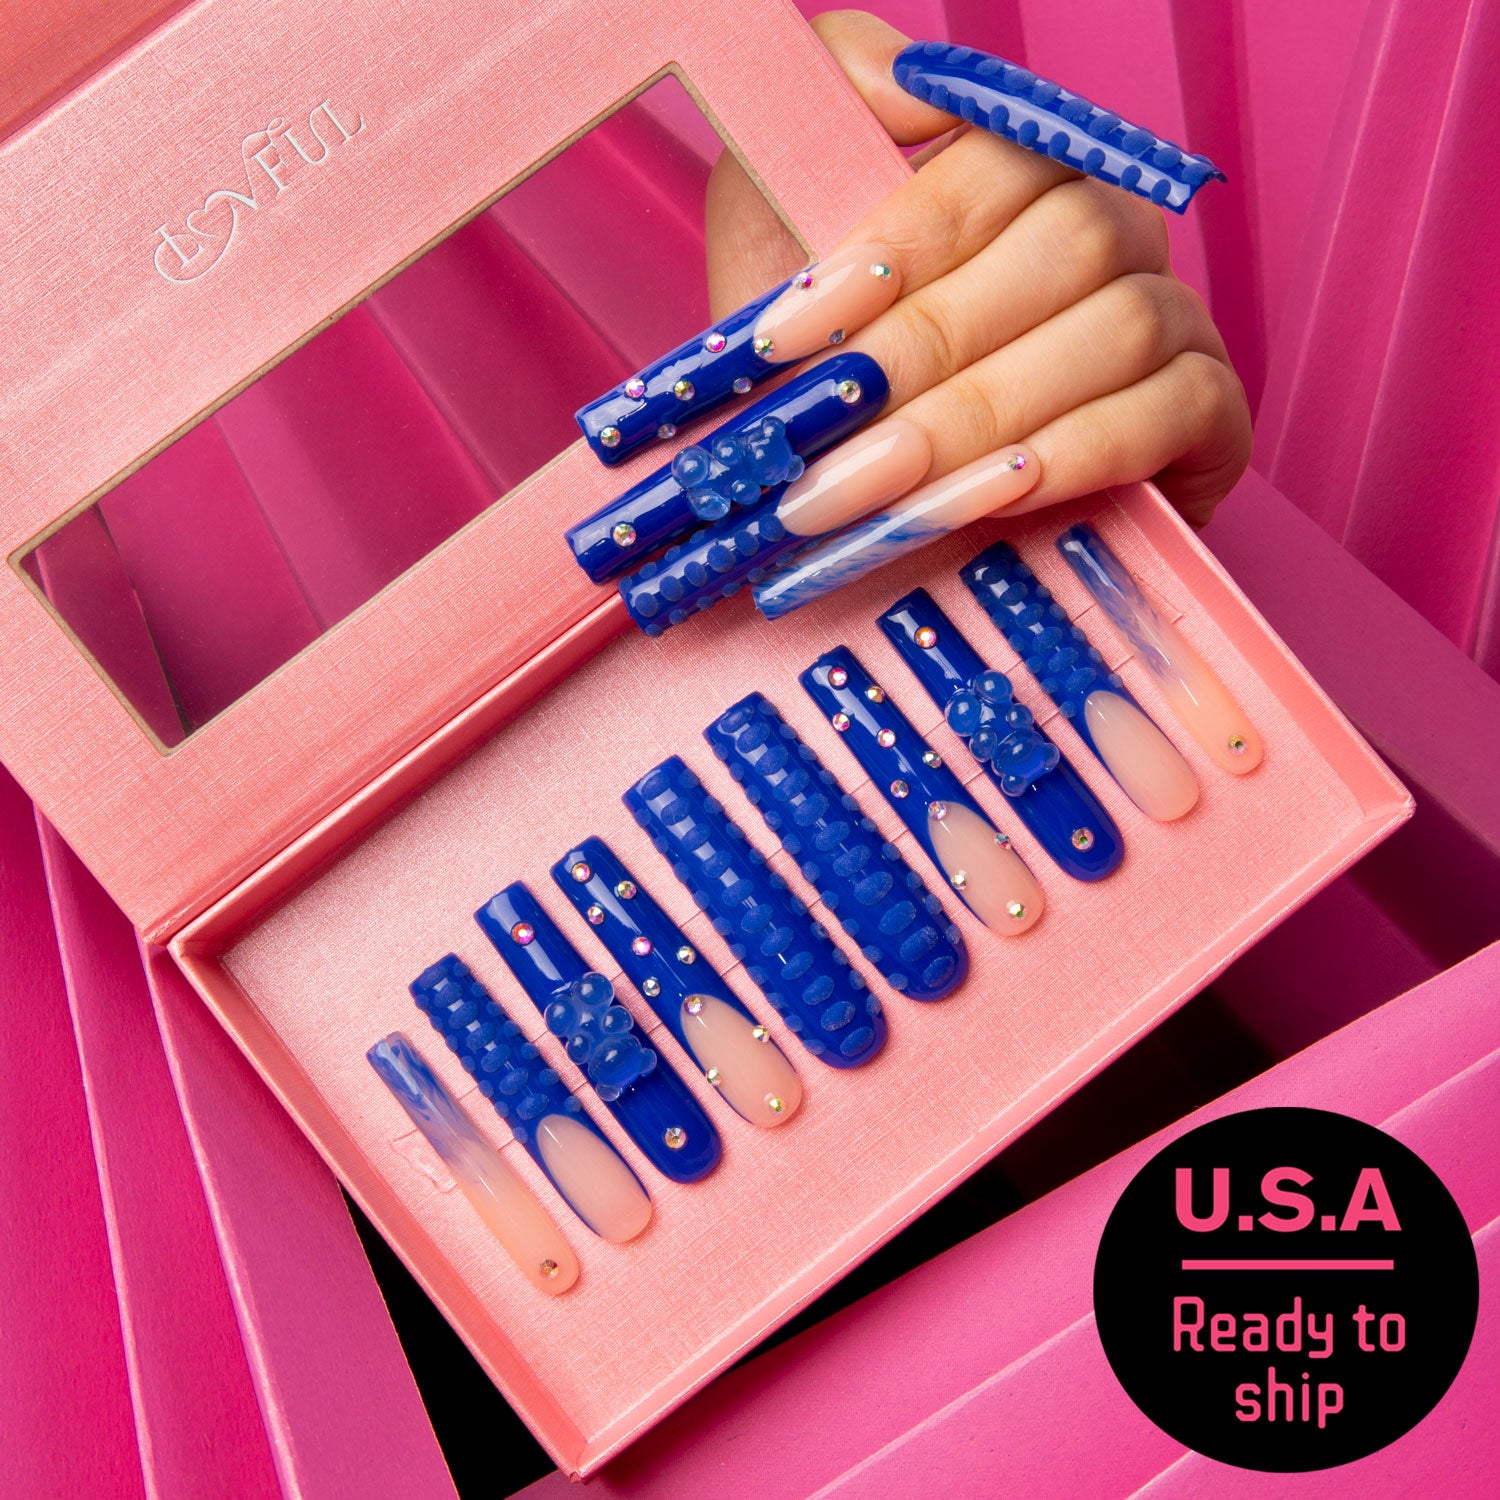 Lovful's Little Blue Bear Rhinestone French tip press-on nails in a pink box, featuring blue hue, gummy bears, rhinestones, and 3D dots. A hand holding some nails above the box. Text reads 'U.S.A Ready to ship.'